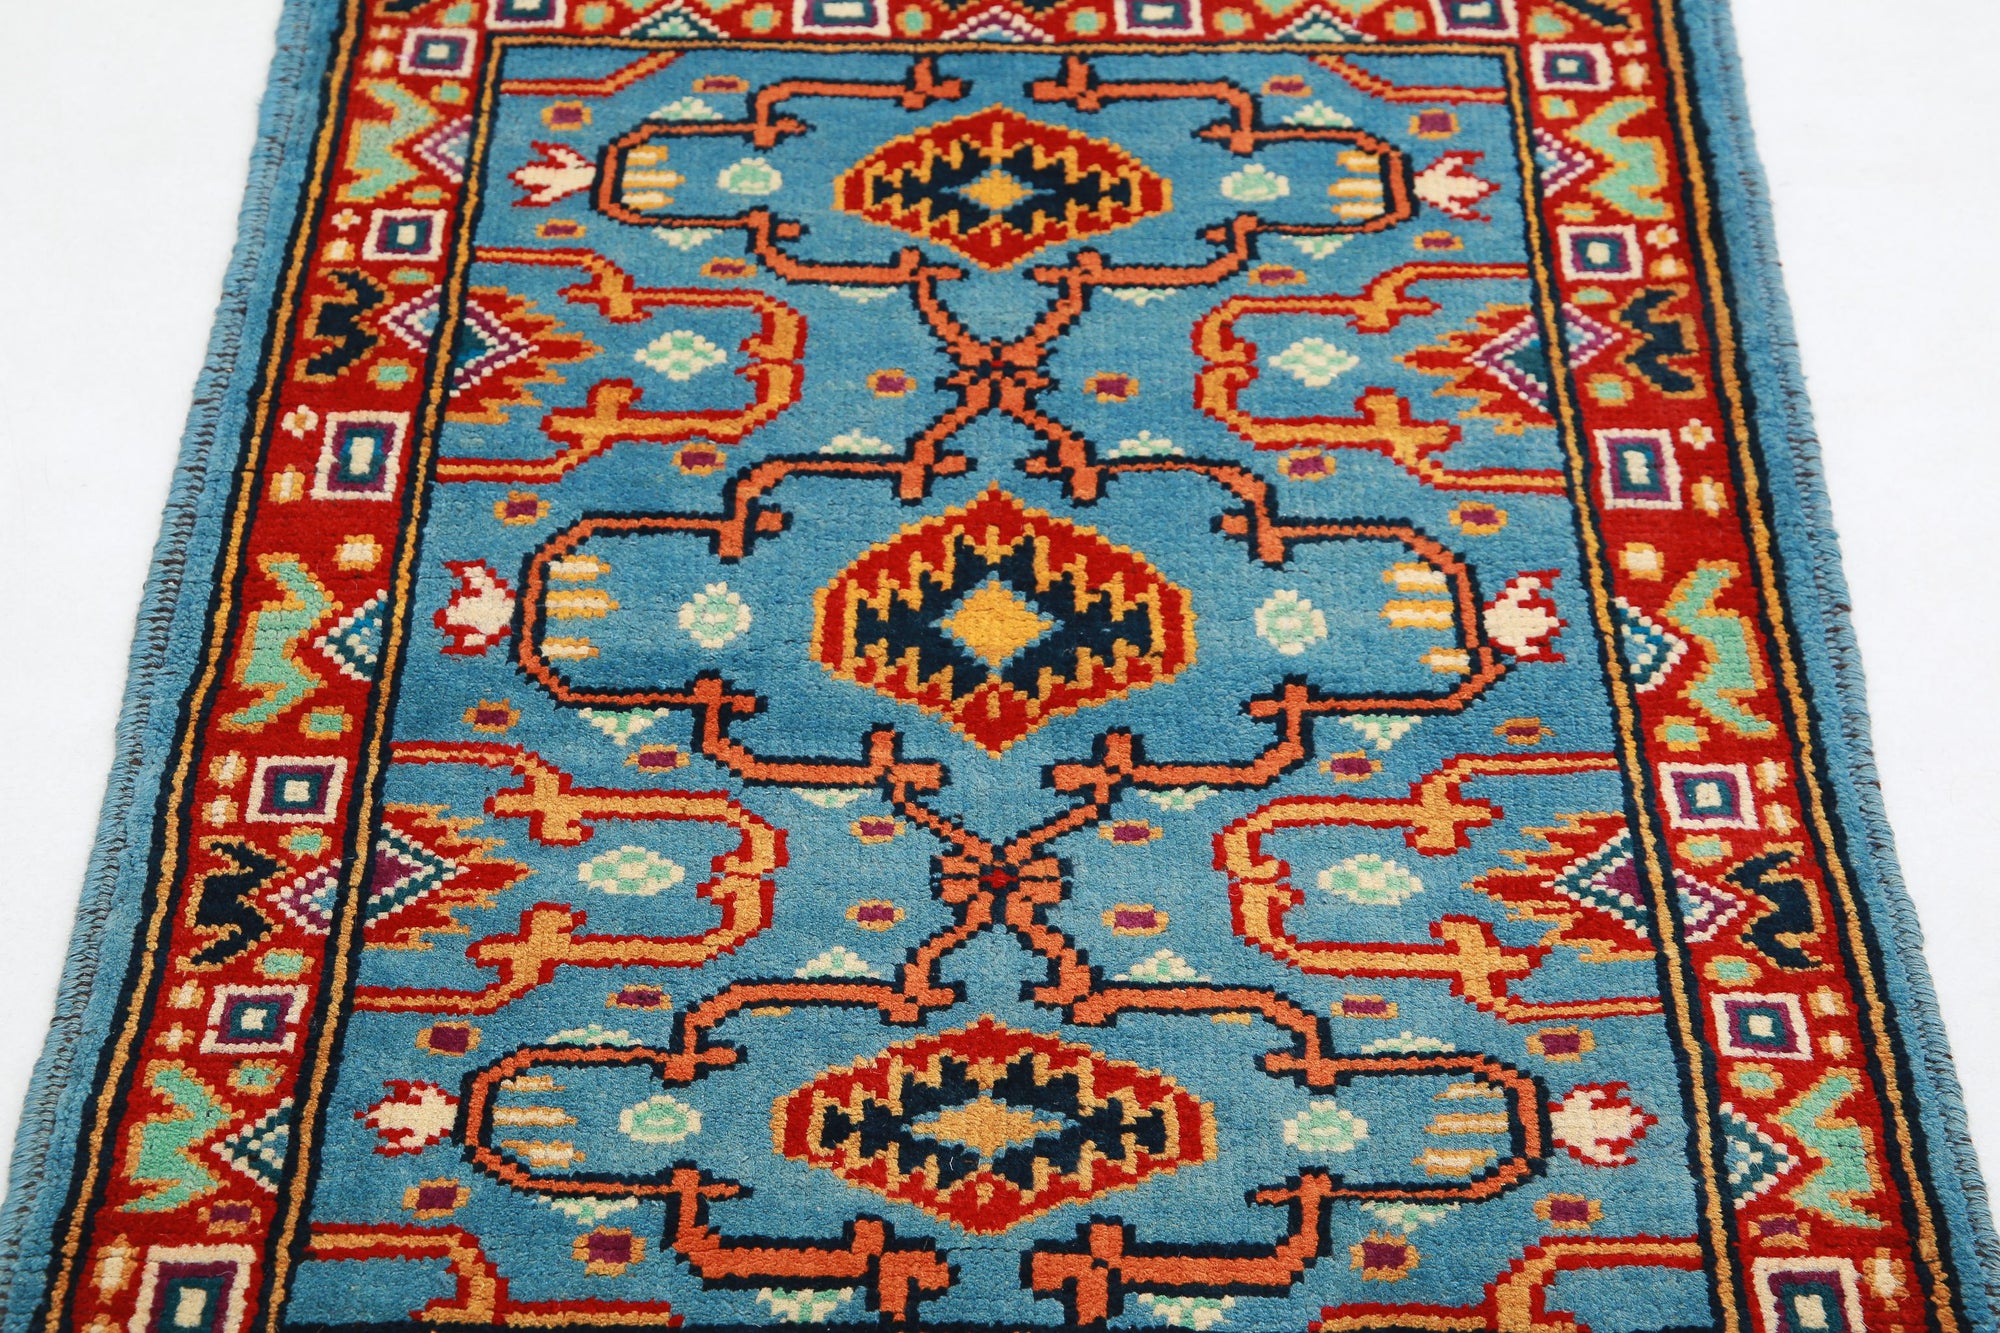 Revival-hand-knotted-qarghani-wool-rug-5014190-4.jpg